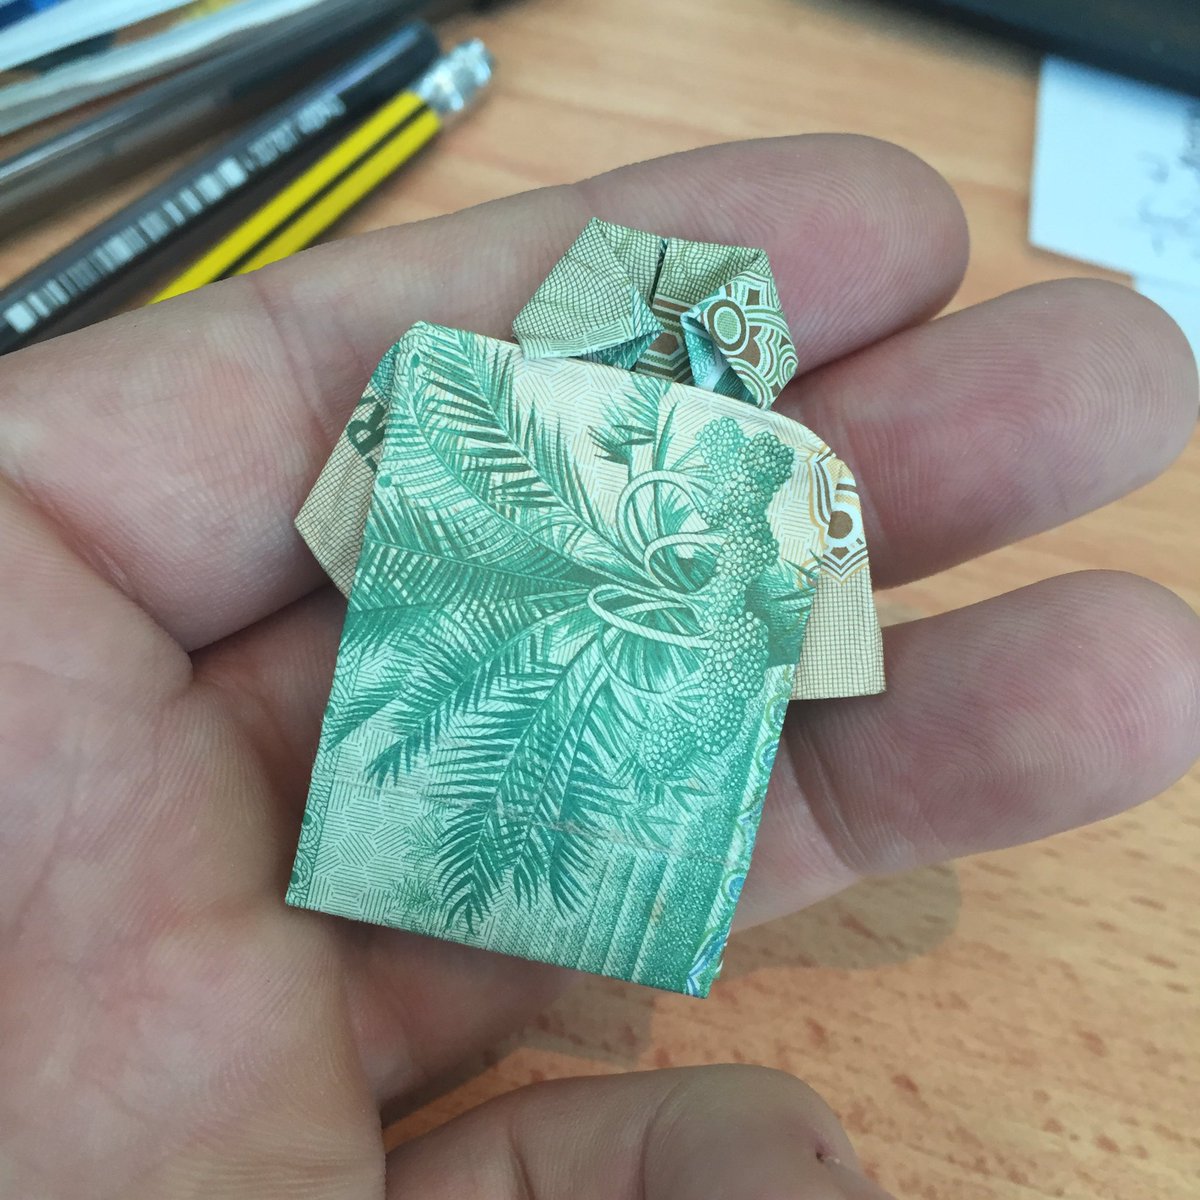 RT @BJPCooke: Went to watch #TheNiceGuys and now my last bank note is a shirt @theniceguys @NovoCinemasUAE #origami https://t.co/6tNcPWTeUq